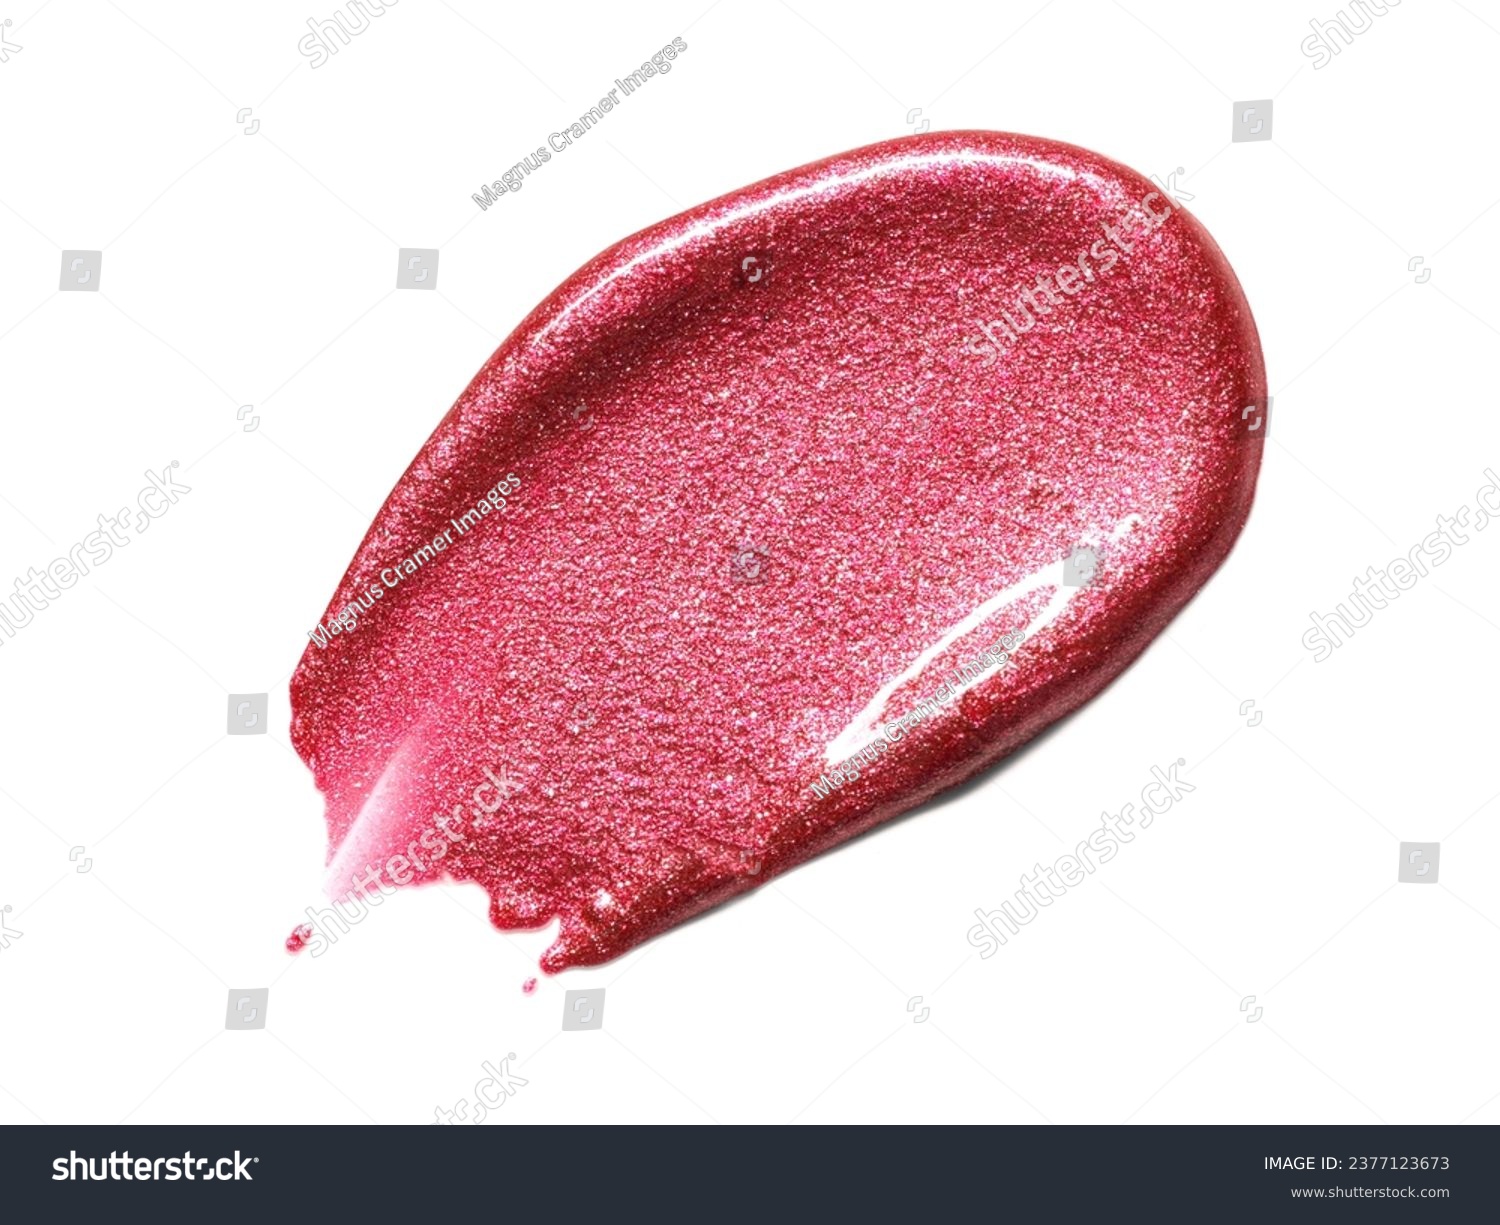 Red metallic shimmering lipgloss texture isolated on white background. Smudged cosmetic product smear. Makup swatch product sample #2377123673